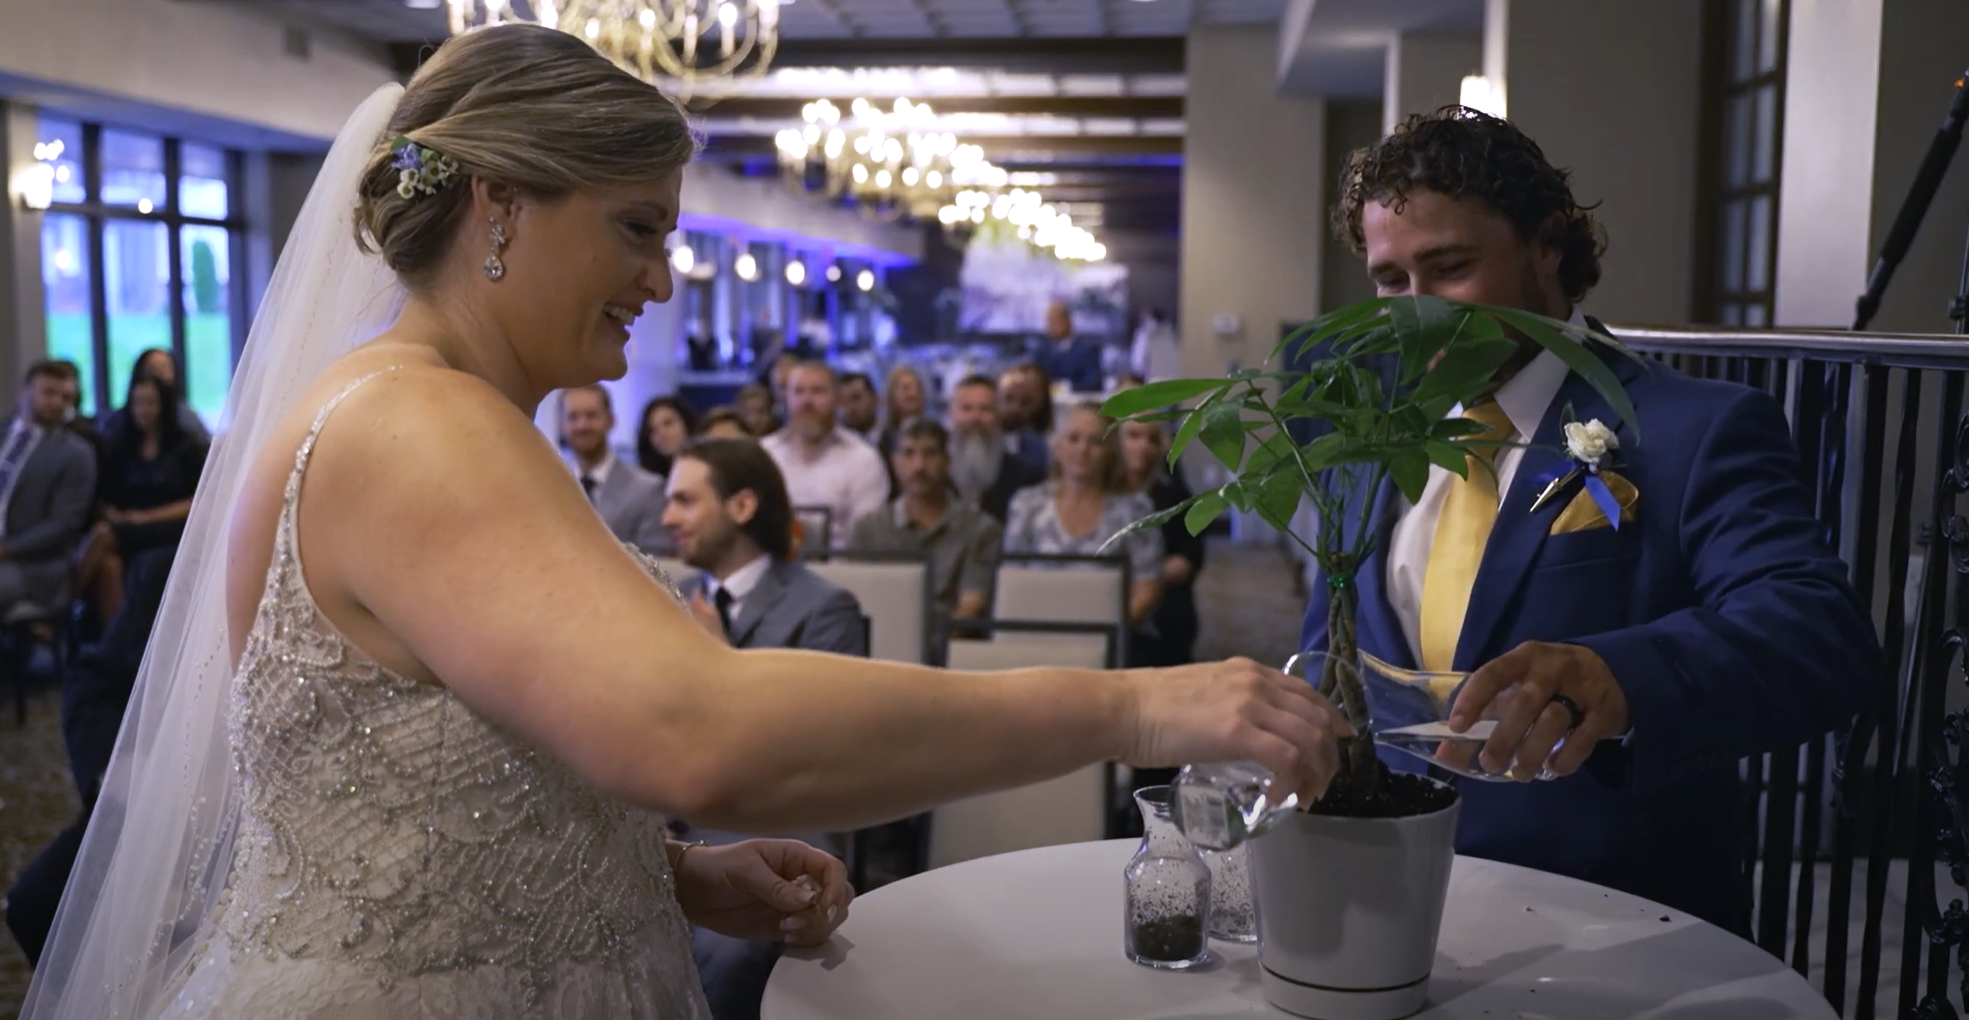 Wedding unity ceremony with a plant in DoubleTree by Hilton Hotel in Port Huron Michigan